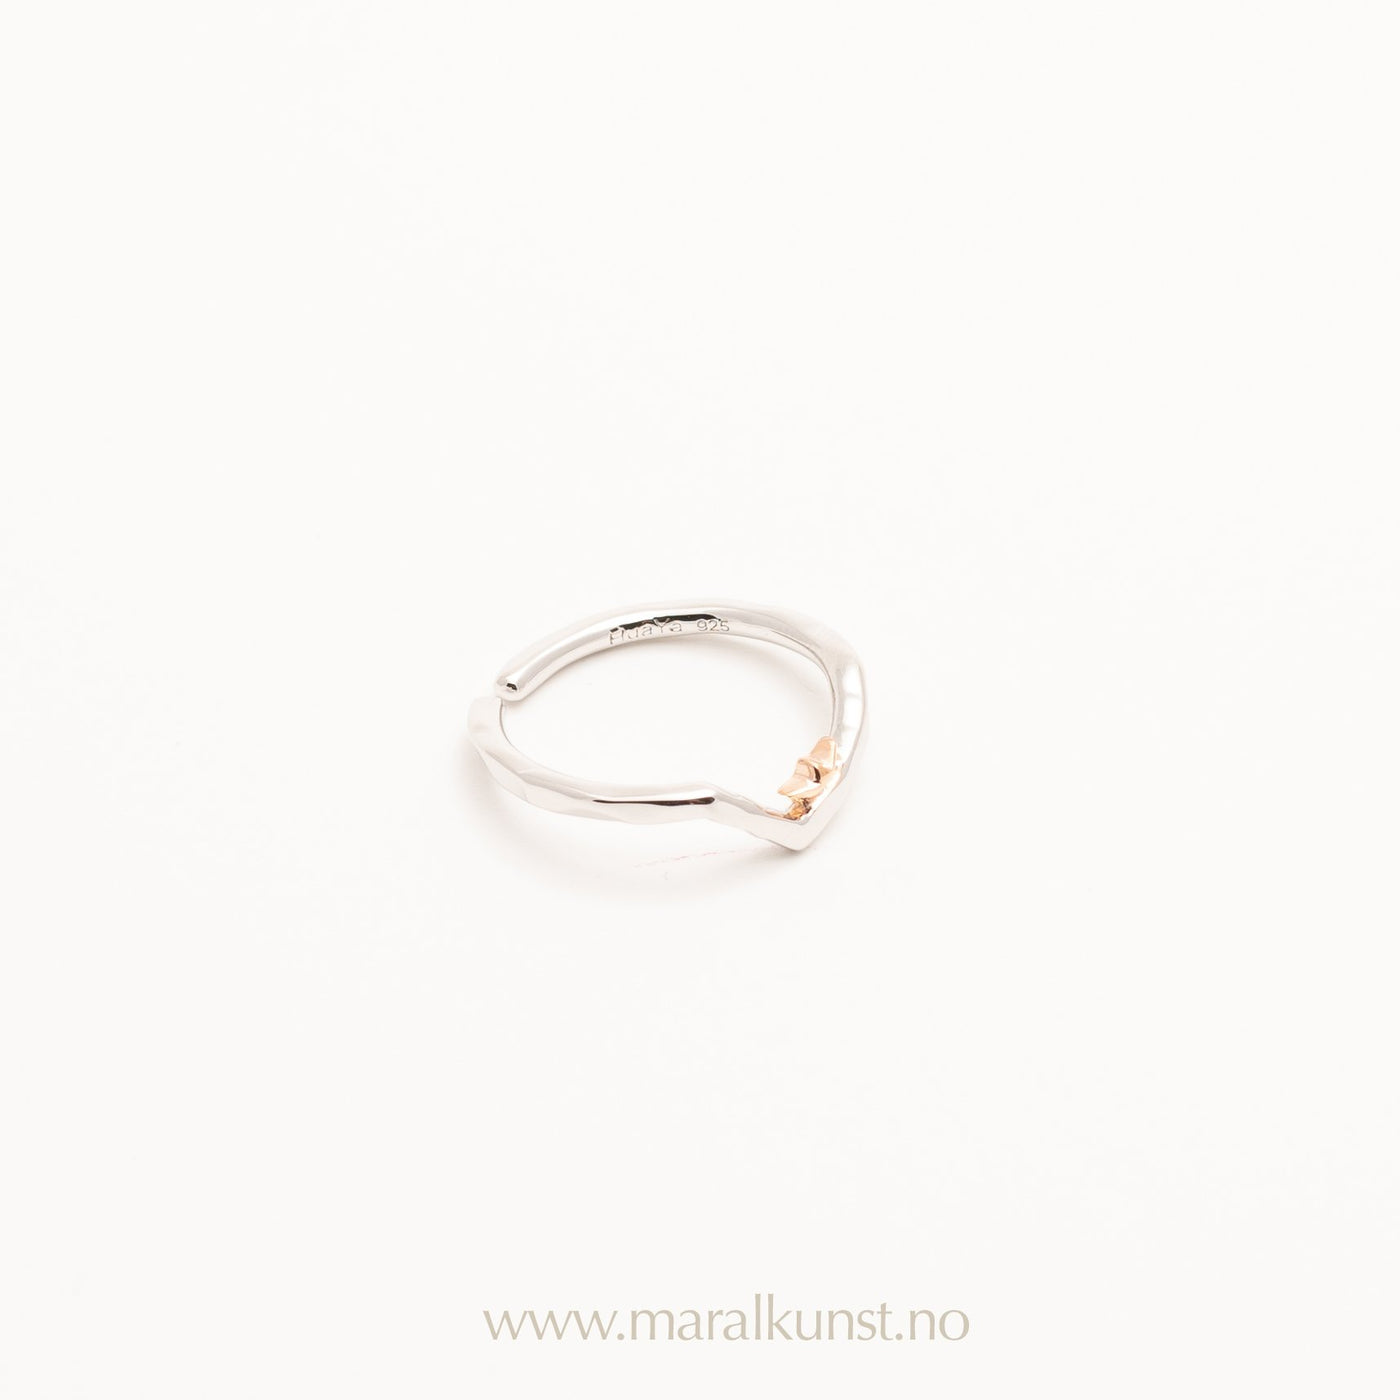 Silver Origami Boat V Shape Ring - Maral Kunst Jewelry